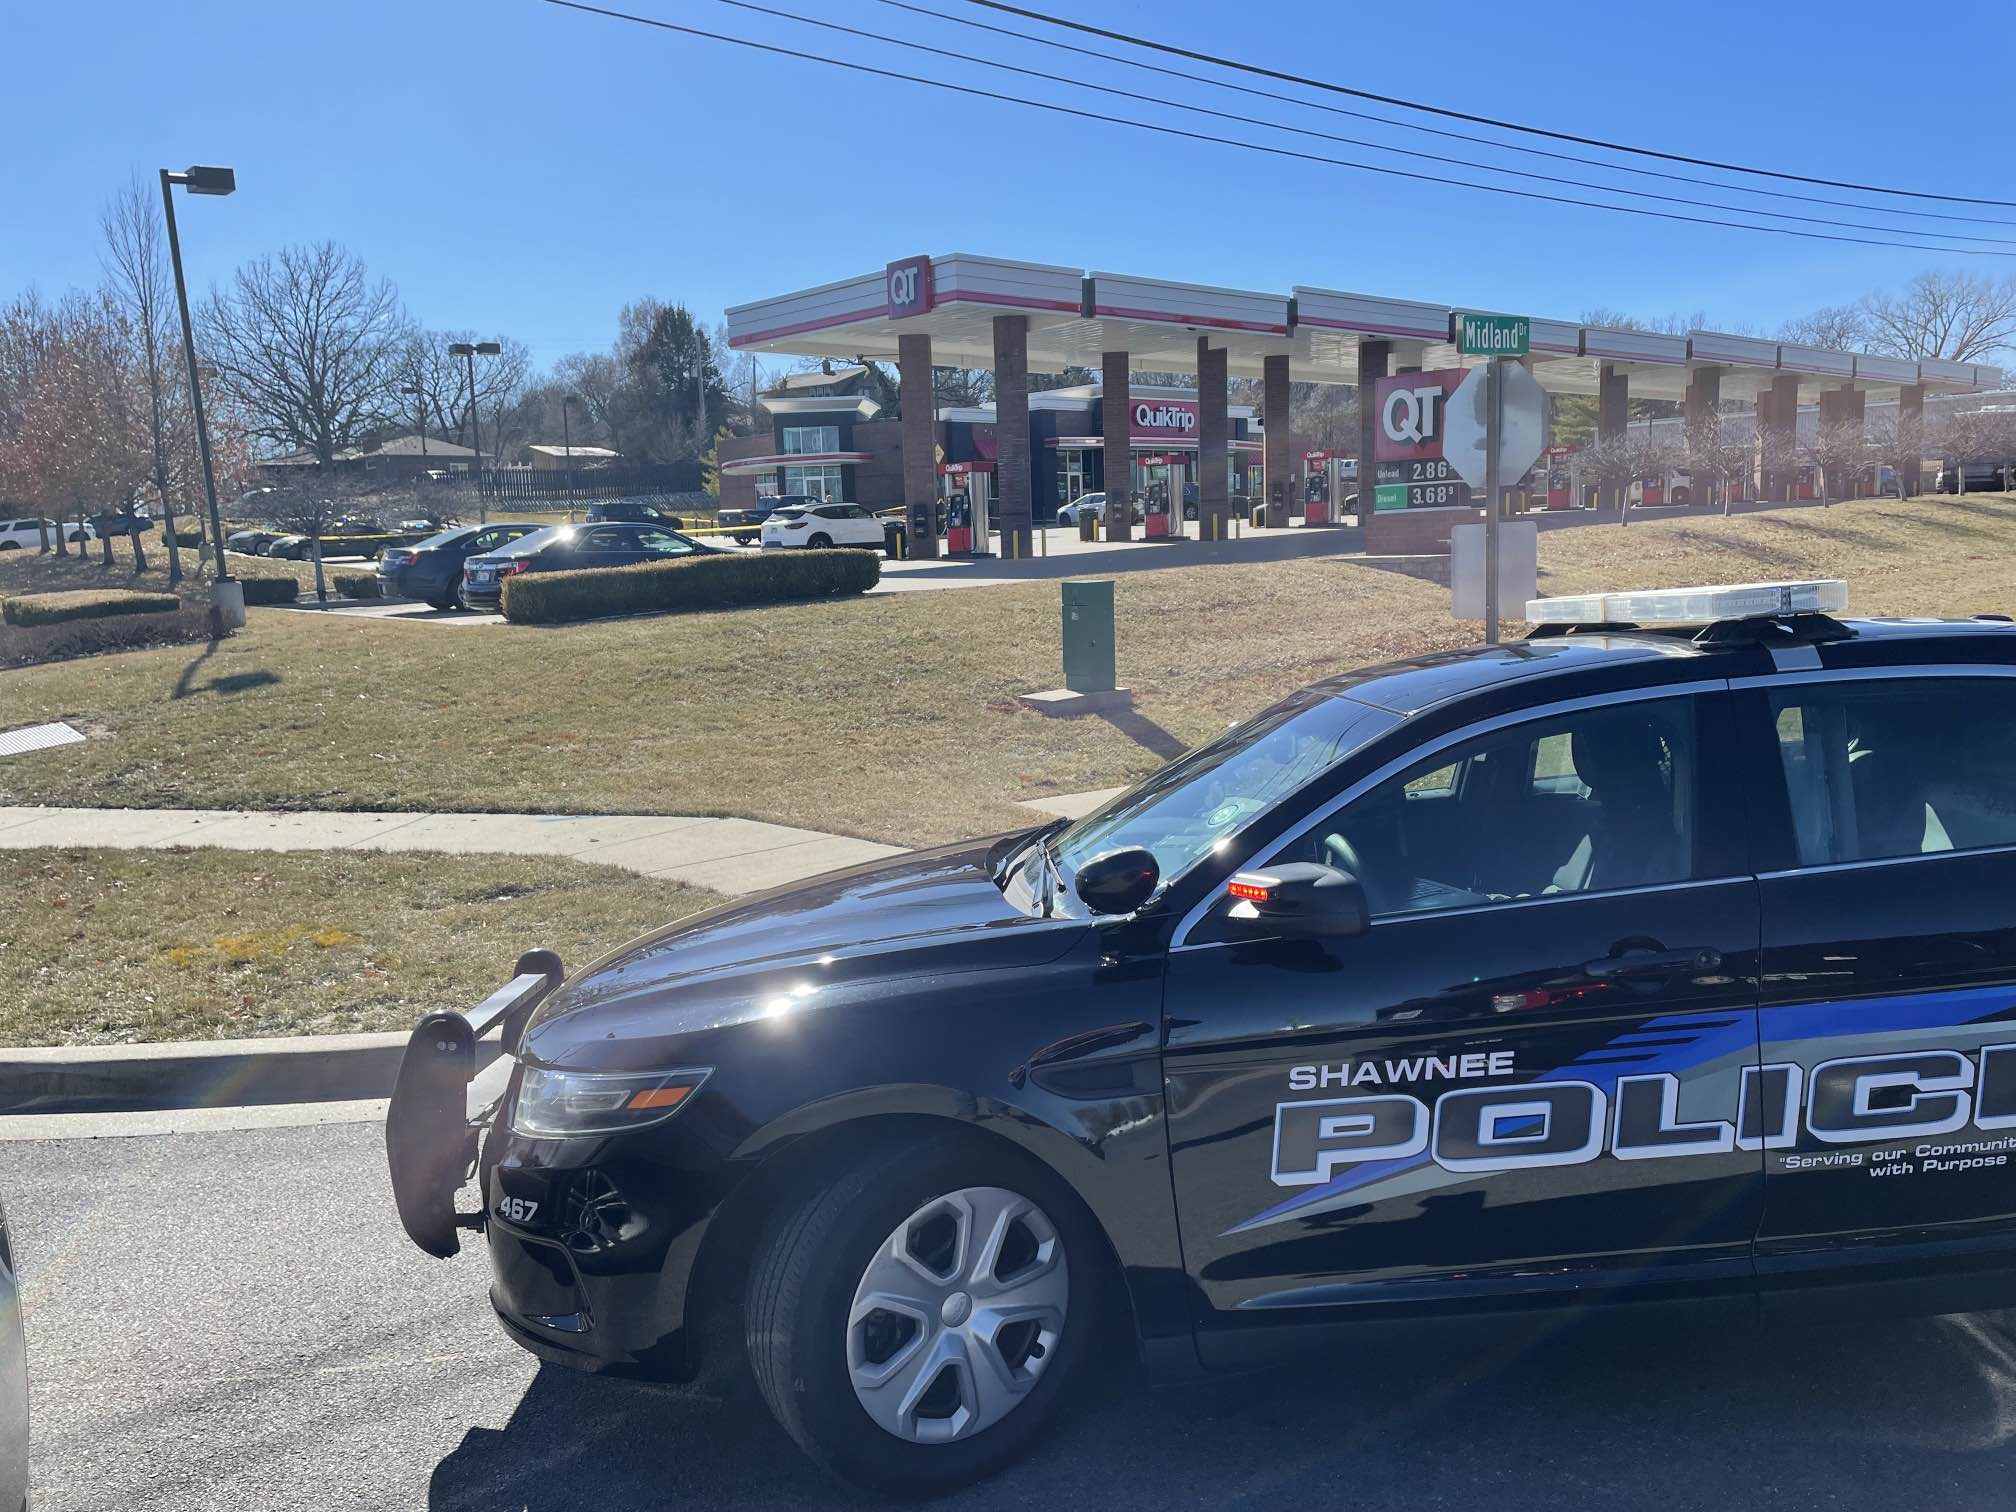 QuikTrip at 21st & Arkansas temporarily closed after looting incident